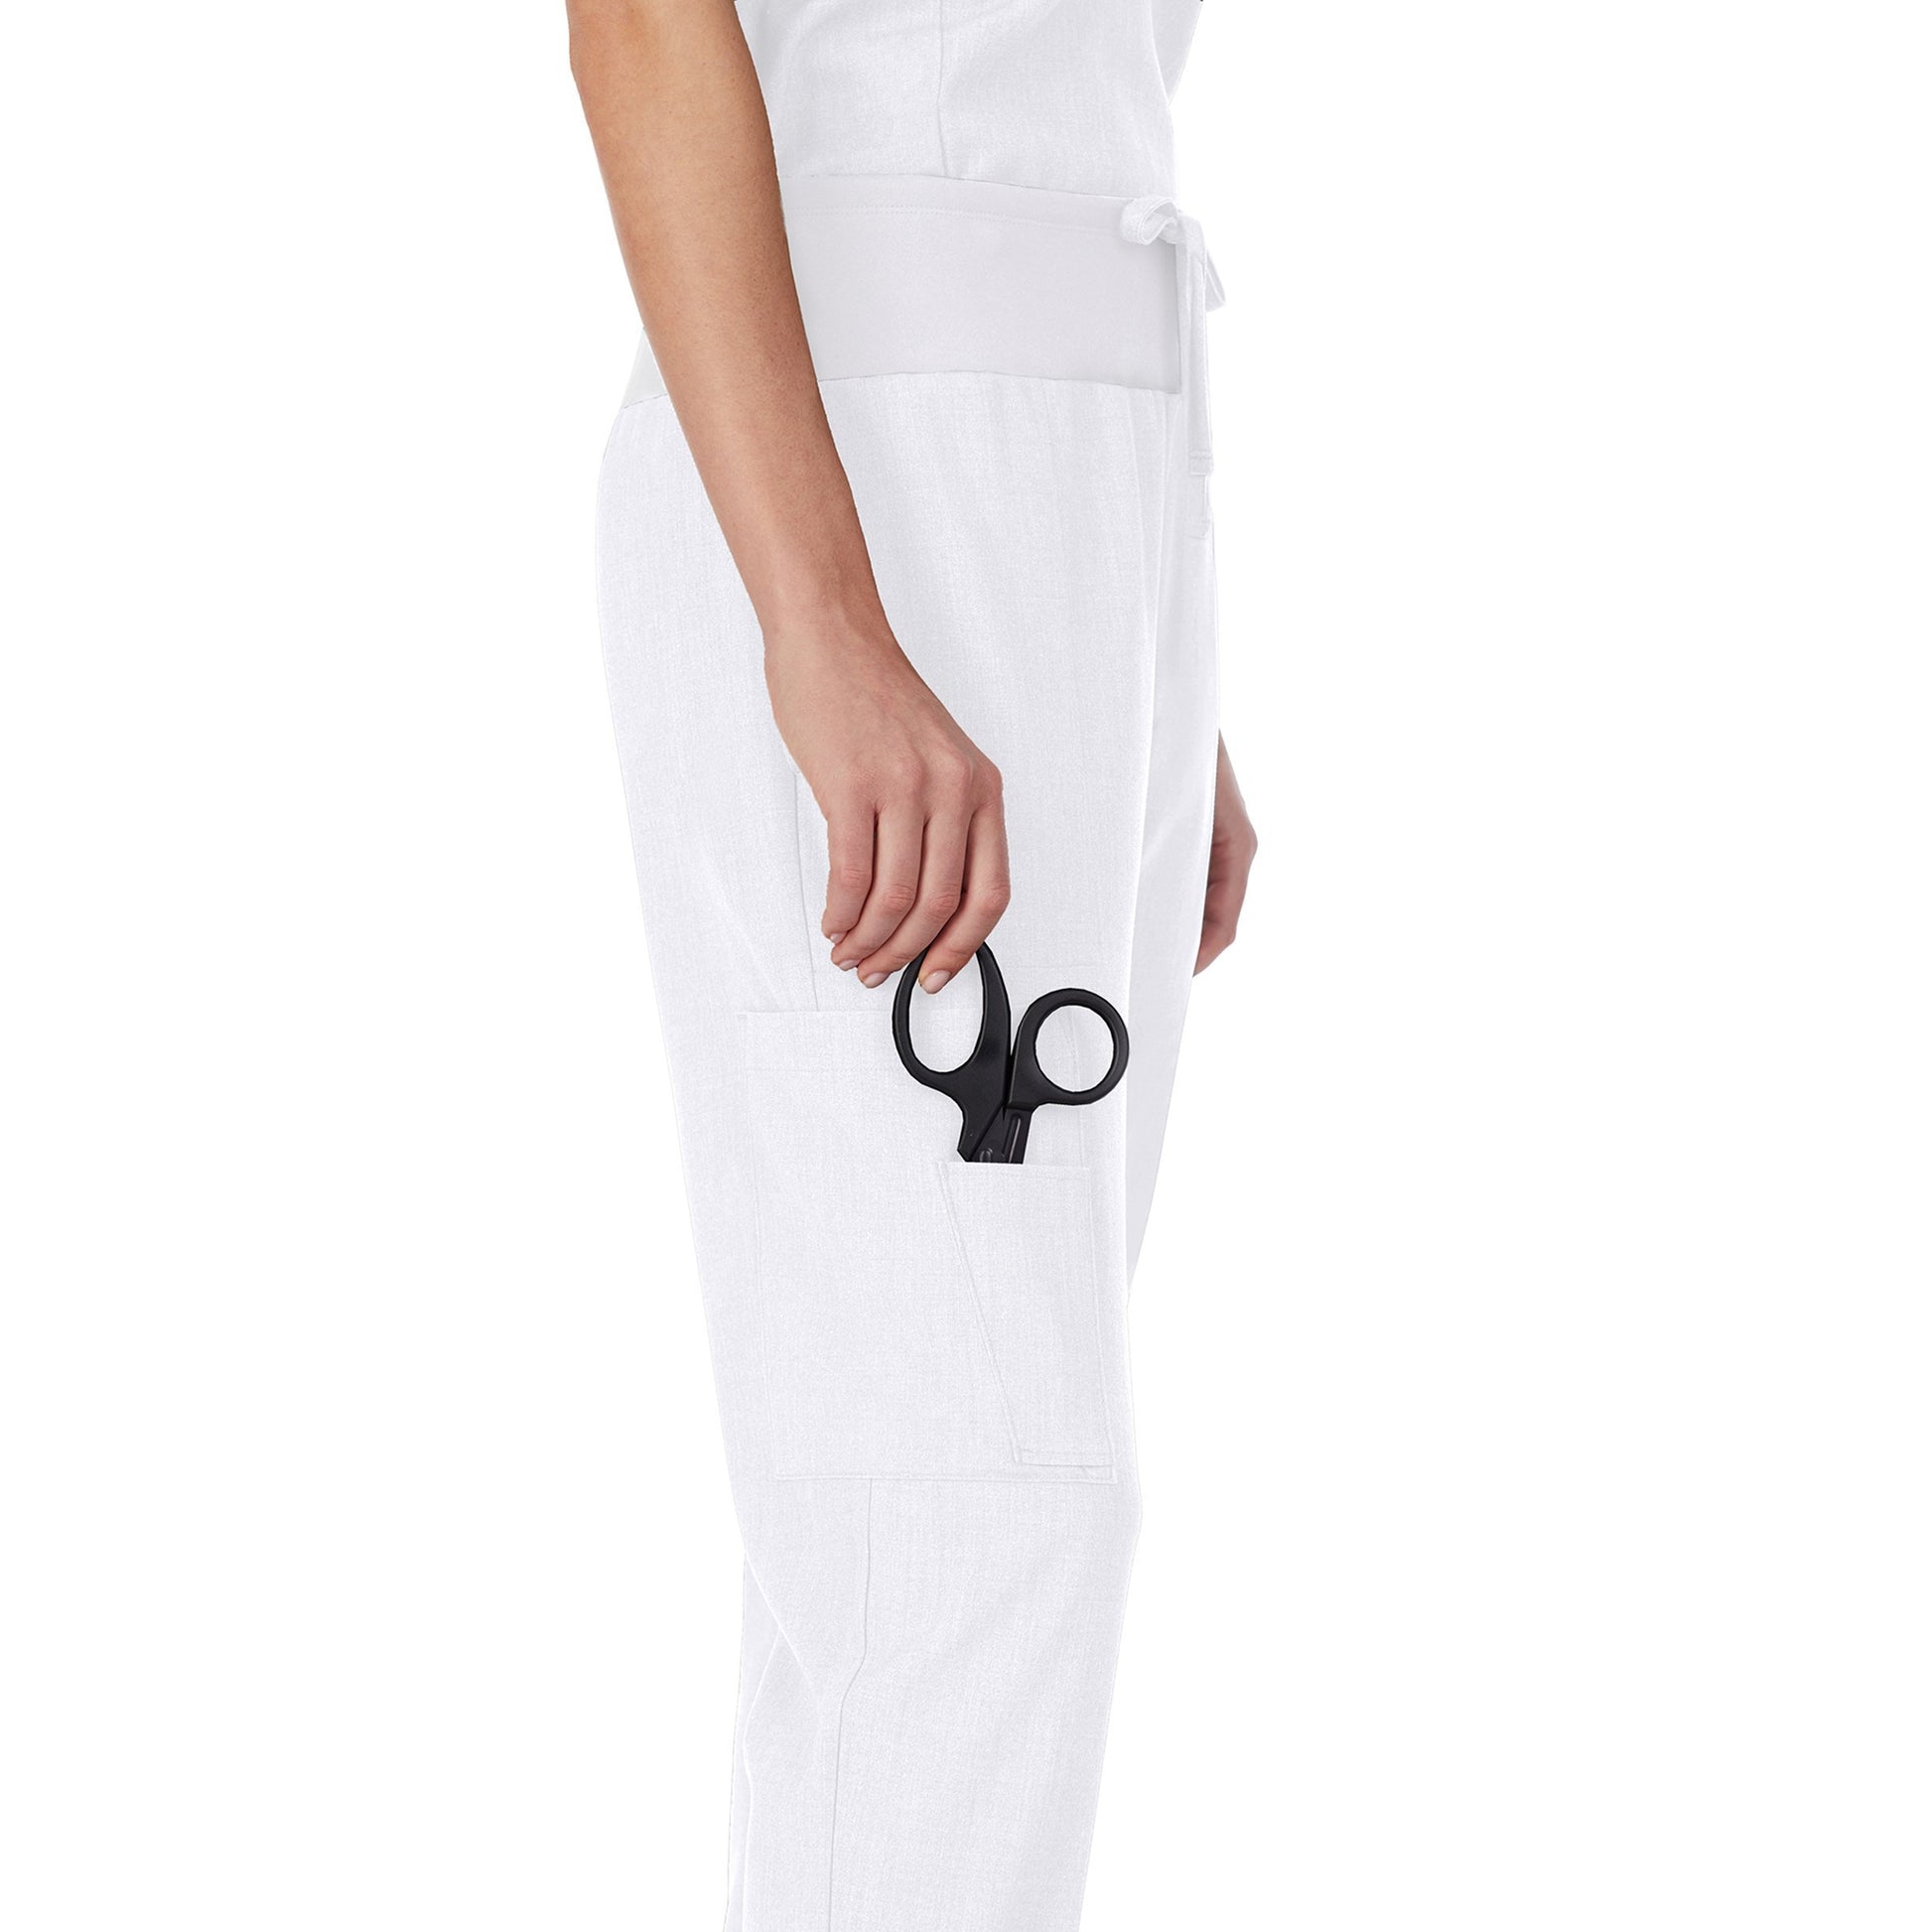 white;Model is wearing size S. She is 5’9”, Bust 32”, Waist 23", Hips 34.5”.@A lady wearing white scrub jogger pant.